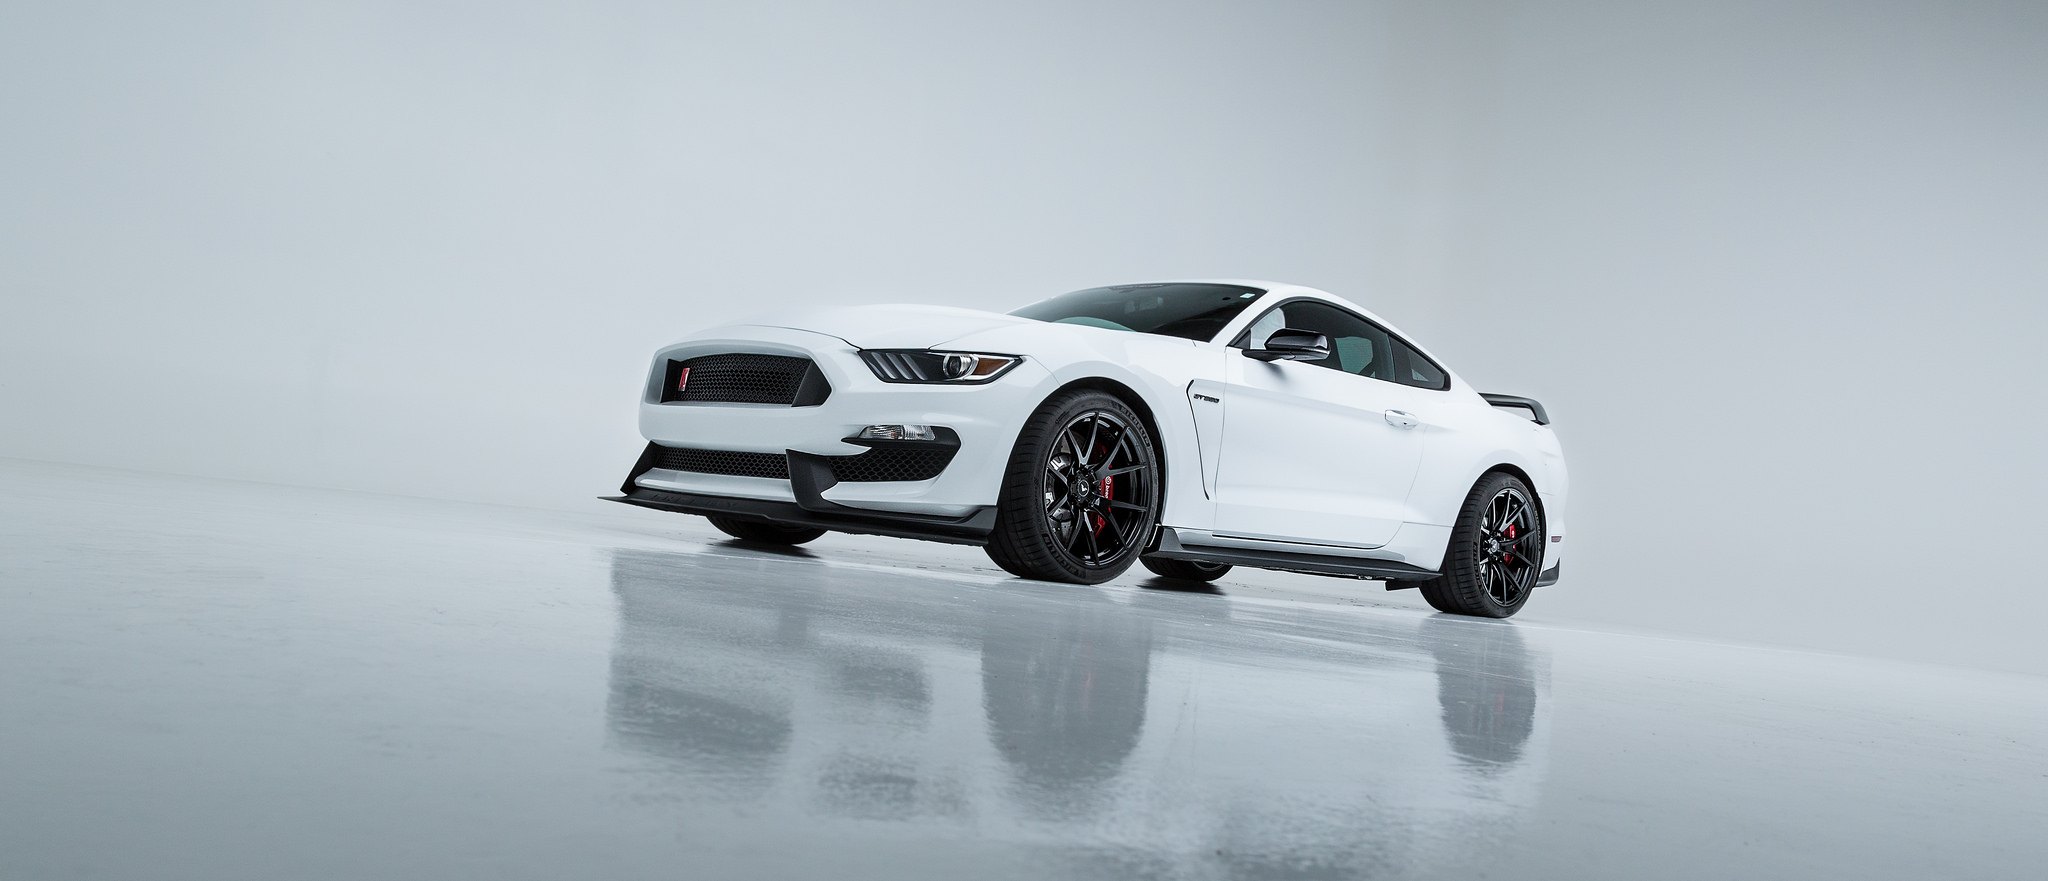 Blacked Out Mesh Grille on White Ford Mustang - Photo by Vorsteiner